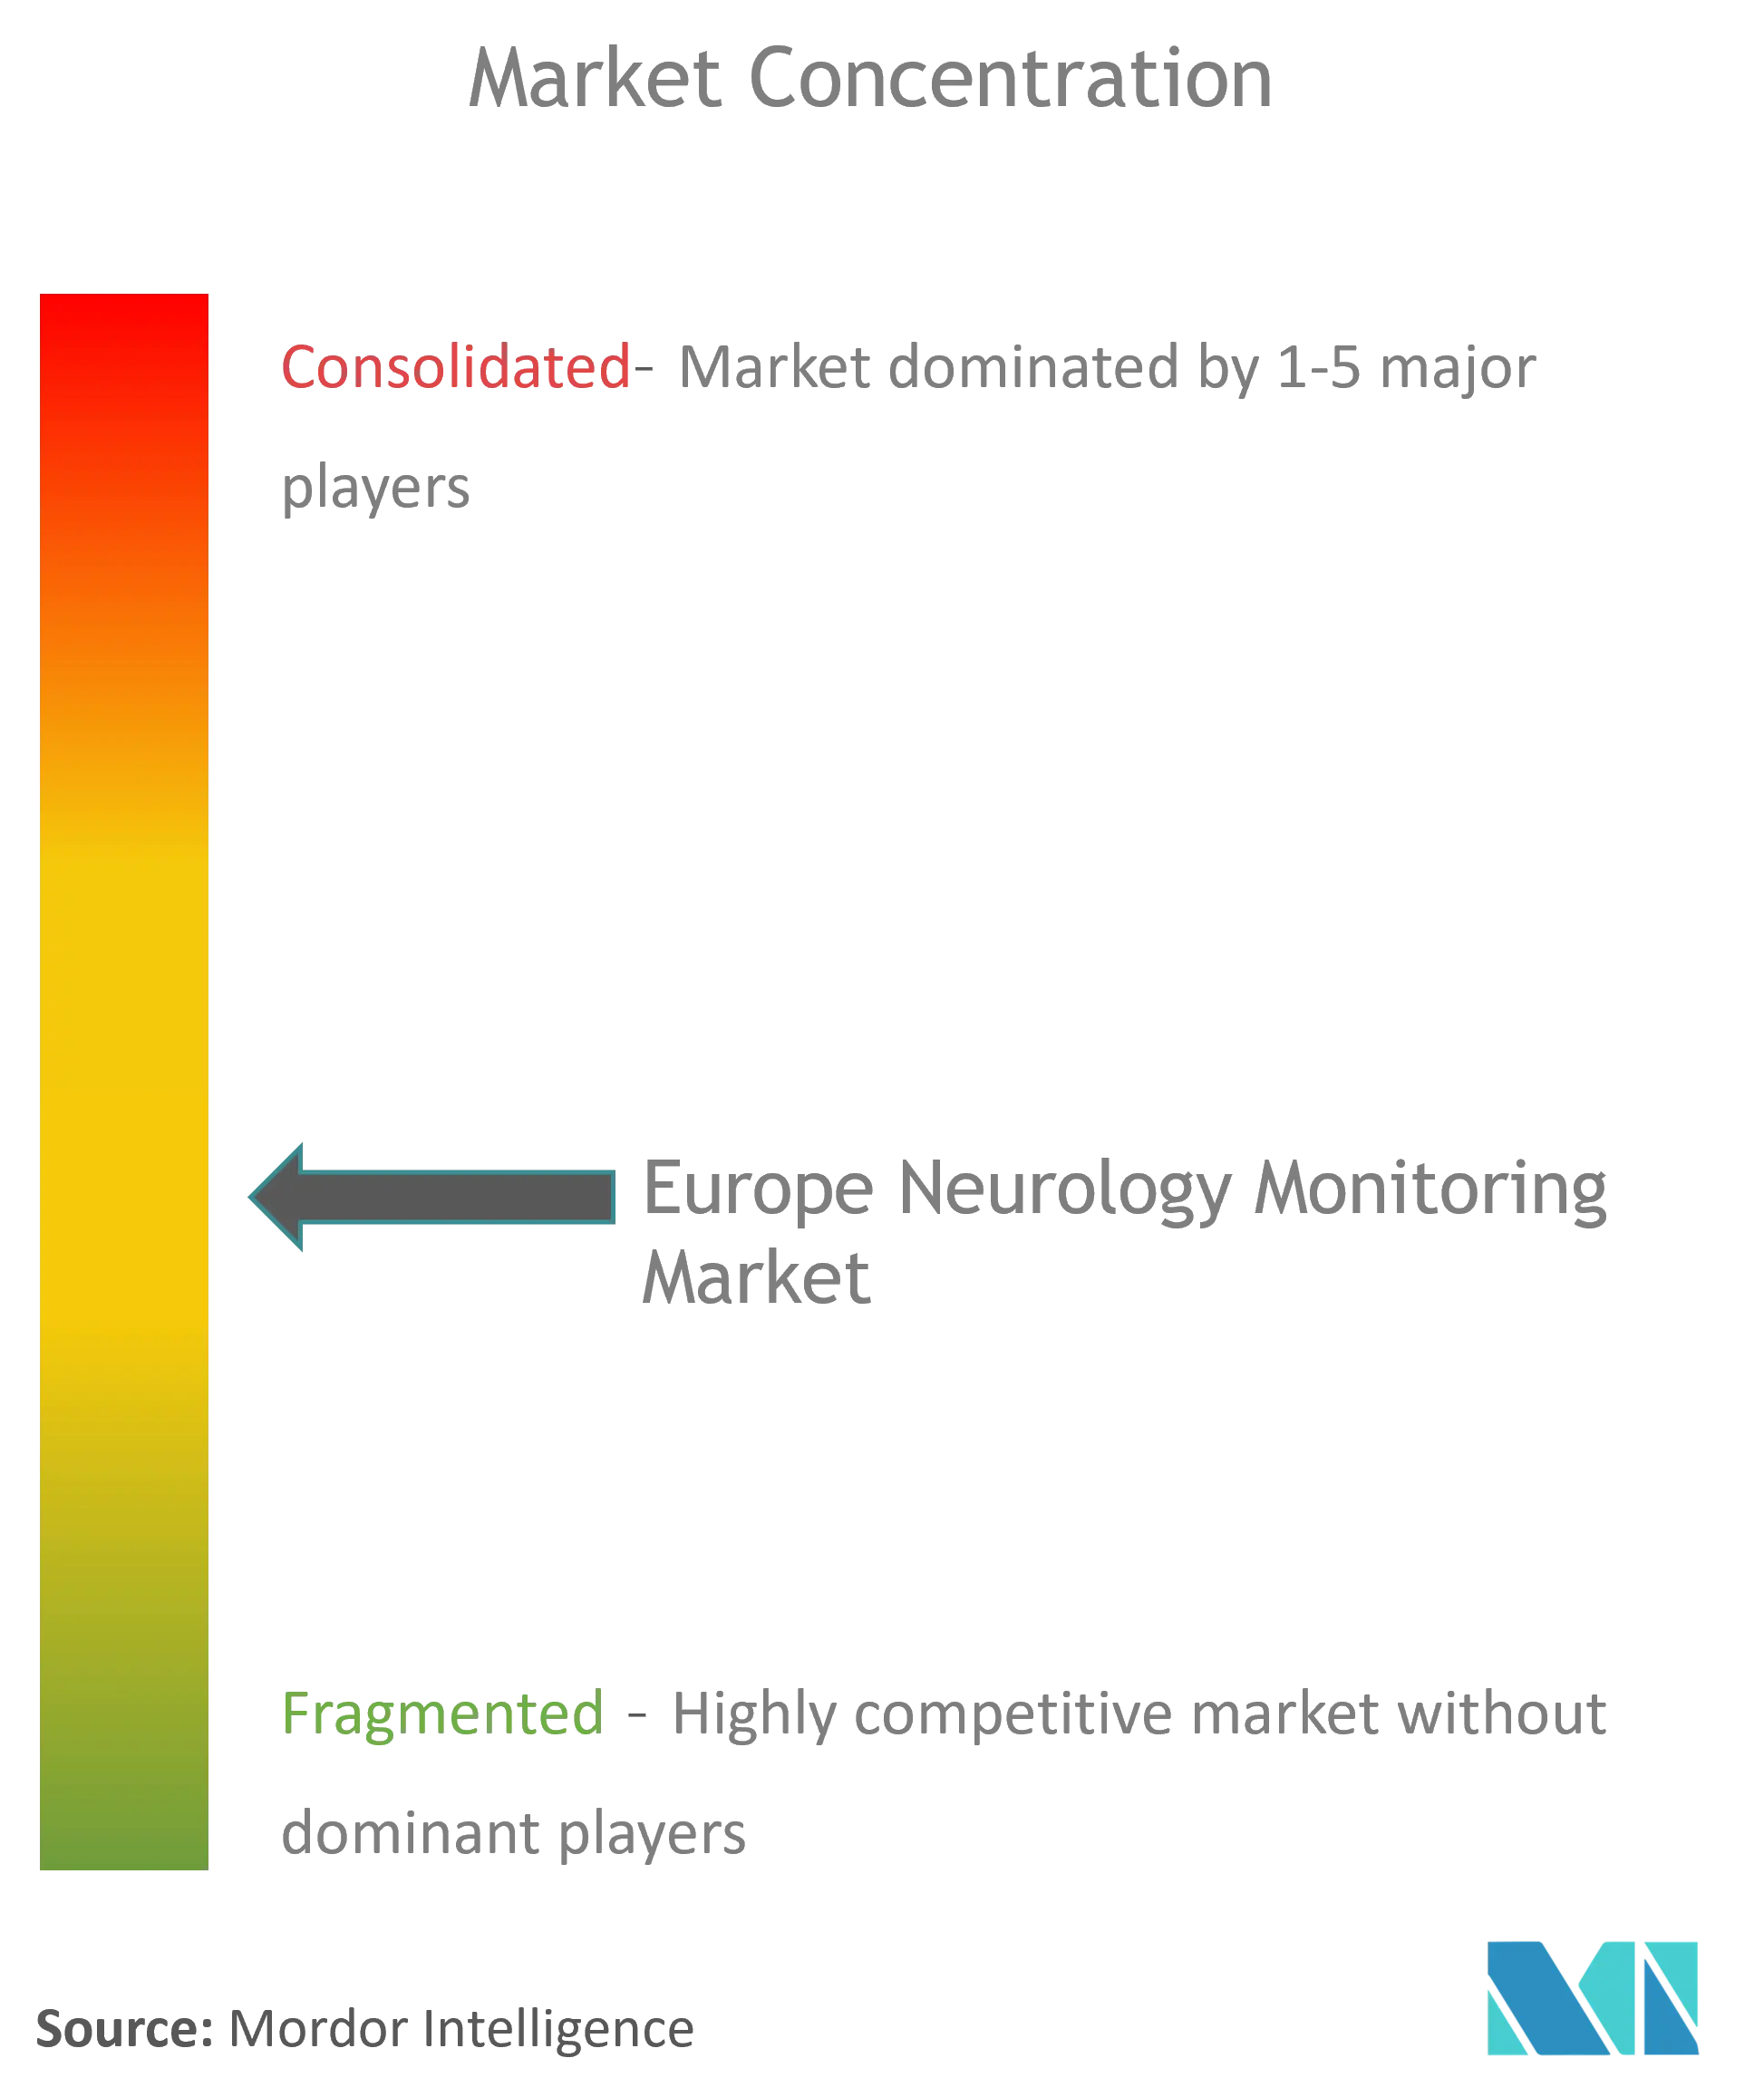 Europe Neurology Monitoring Market Concentration